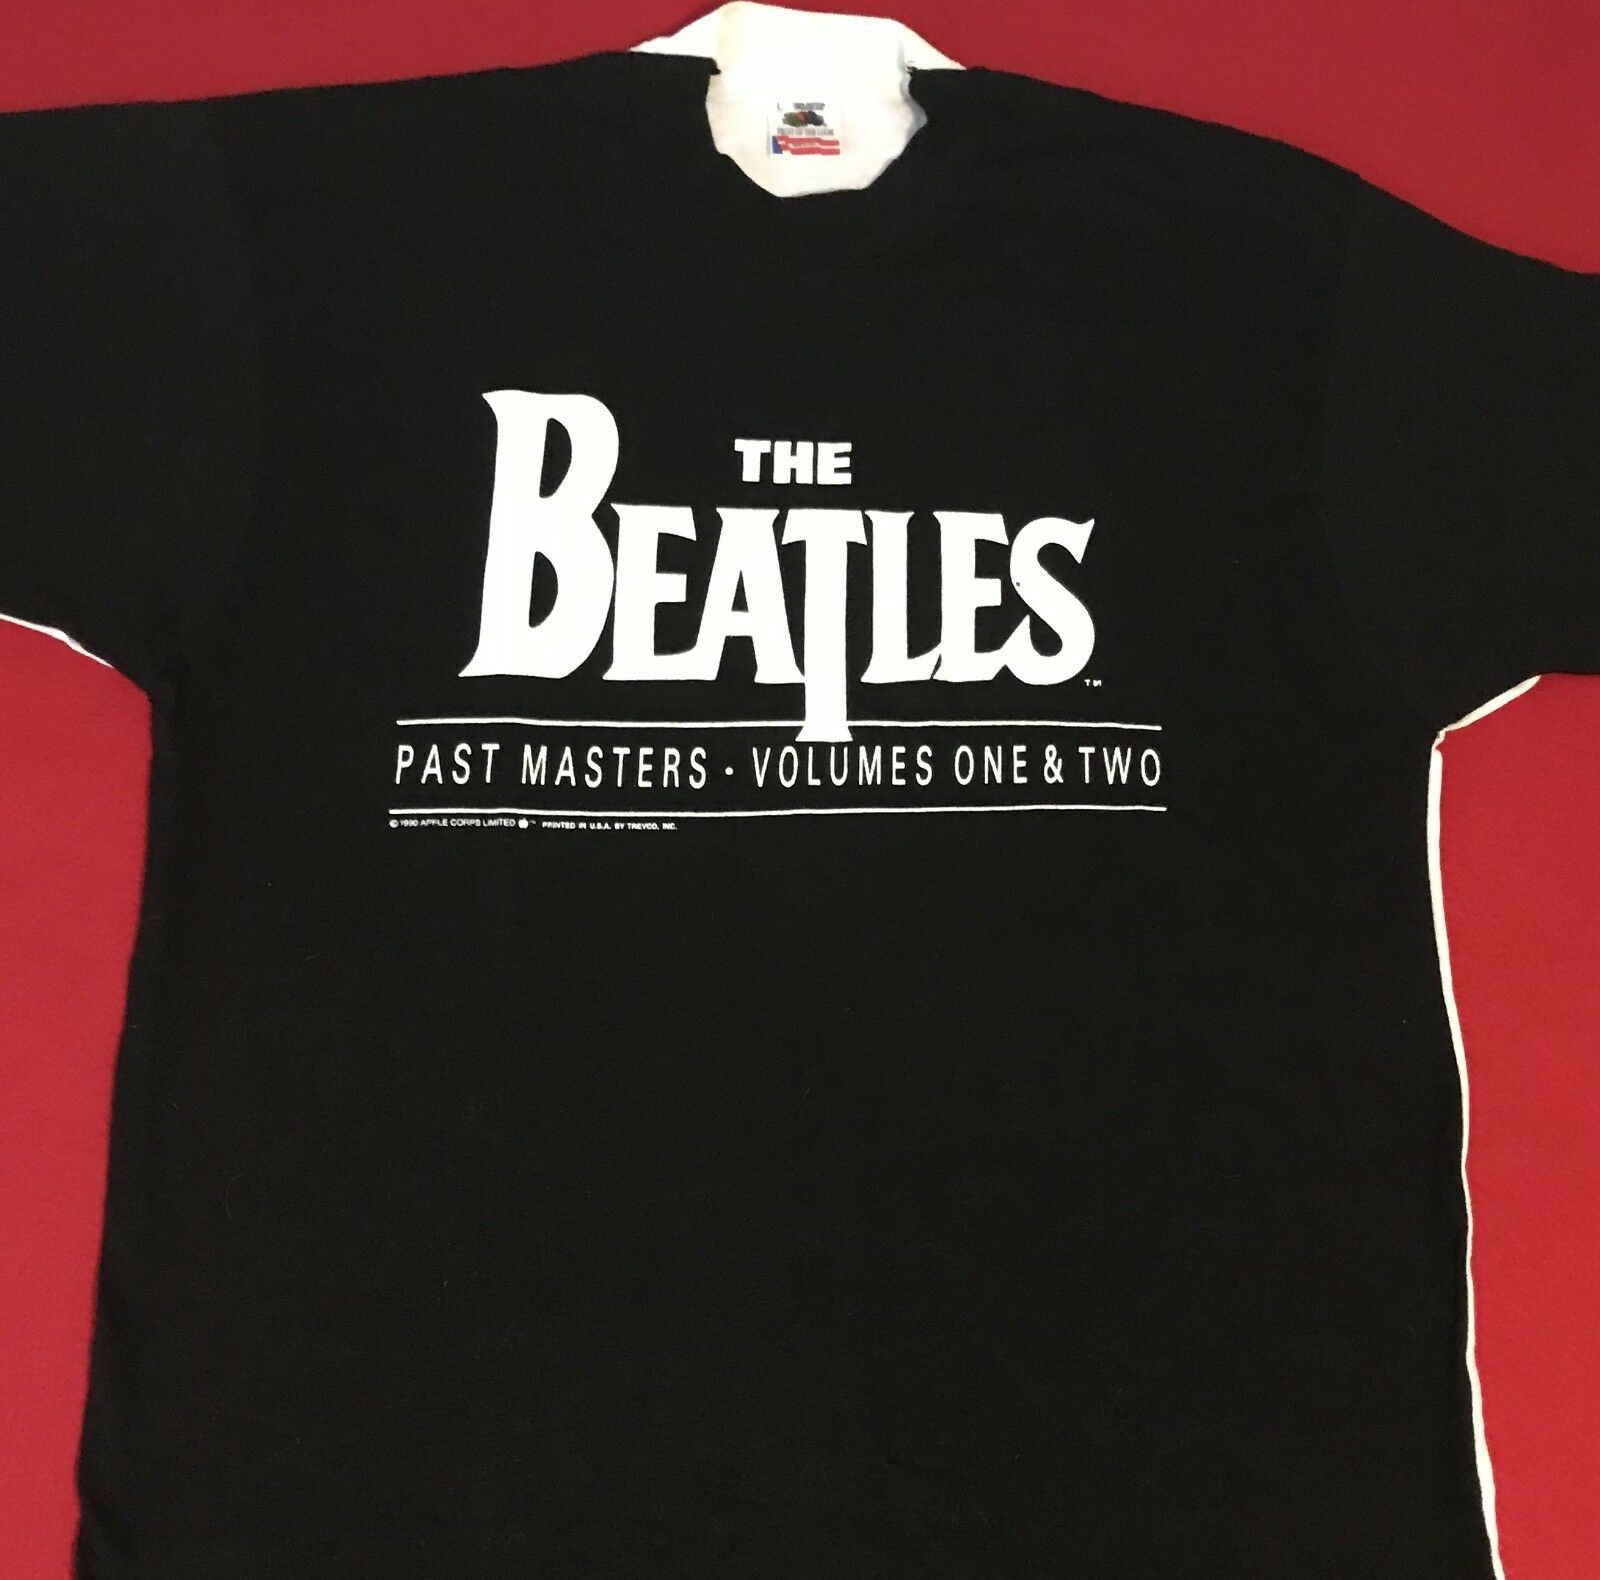 Vintage BEATLES Past Masters 1990 Black and White T - SHIRT LG